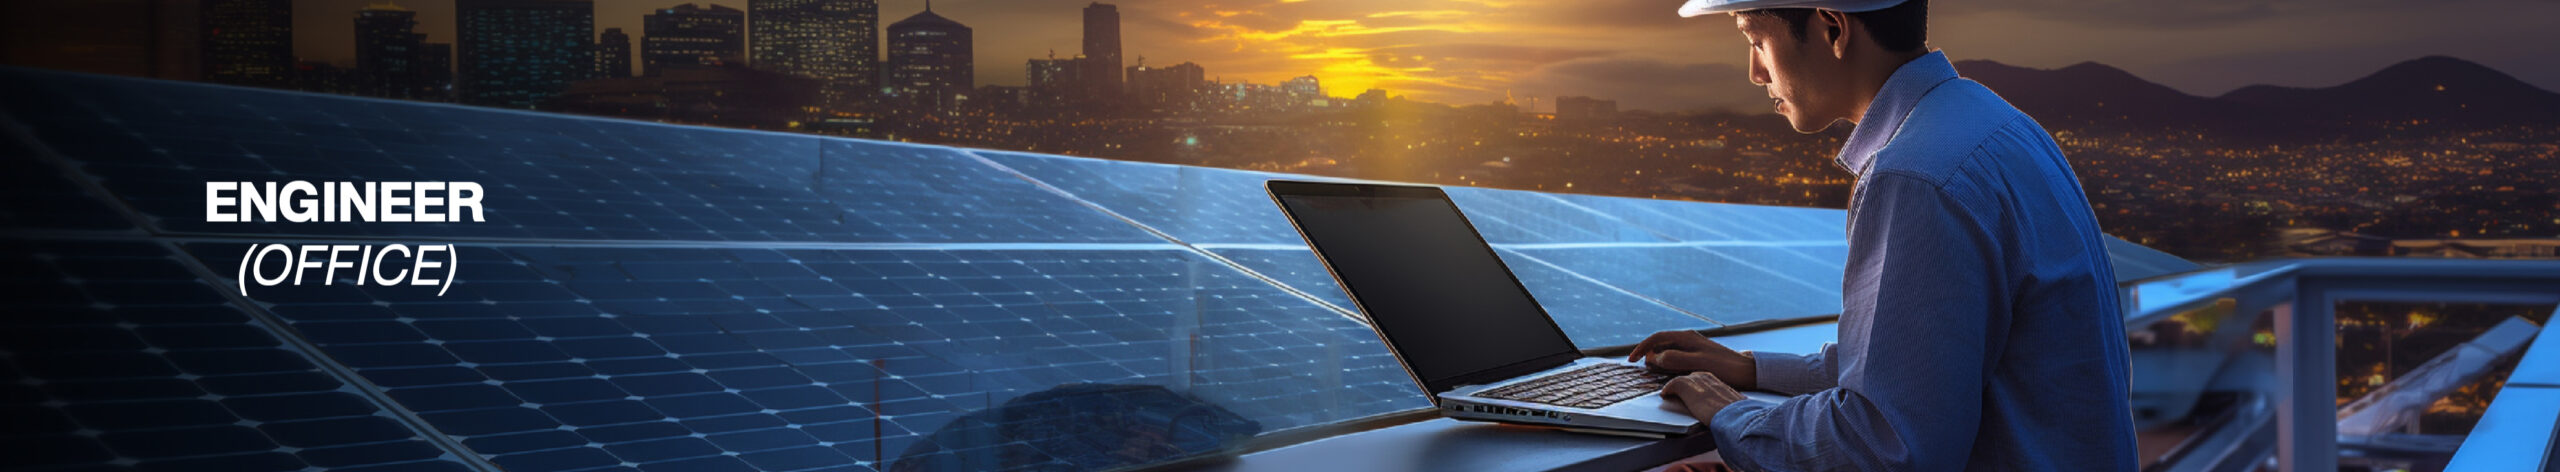 Office Engineer Solar cell -resize